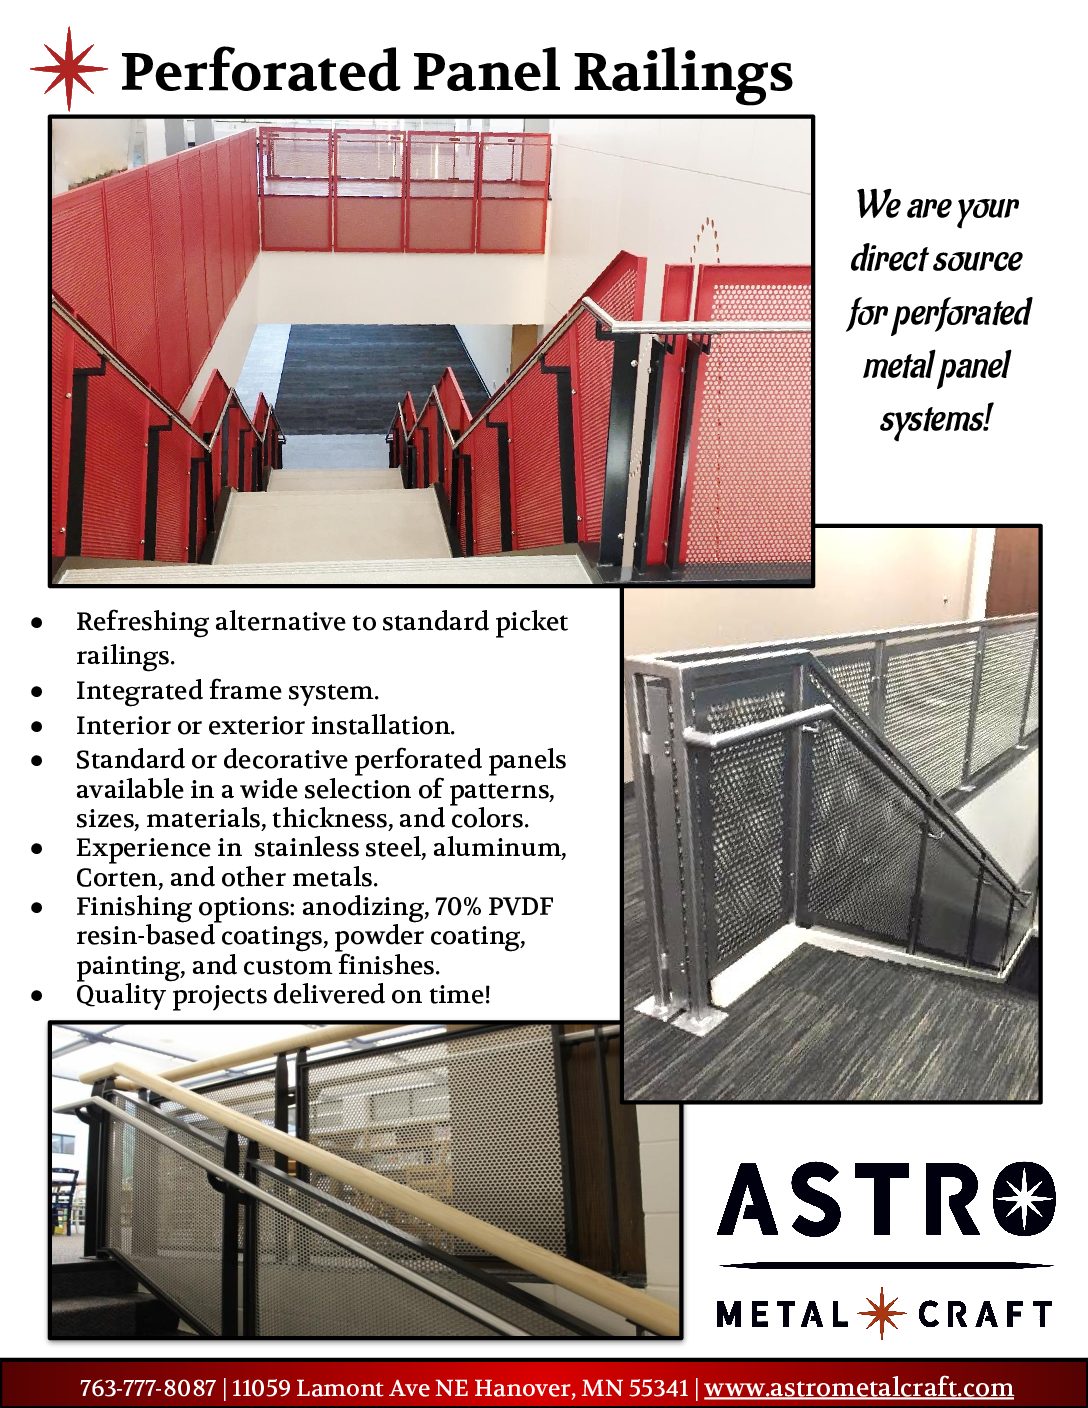 Astro Metal Craft – Perforated Panel Railings Line Card